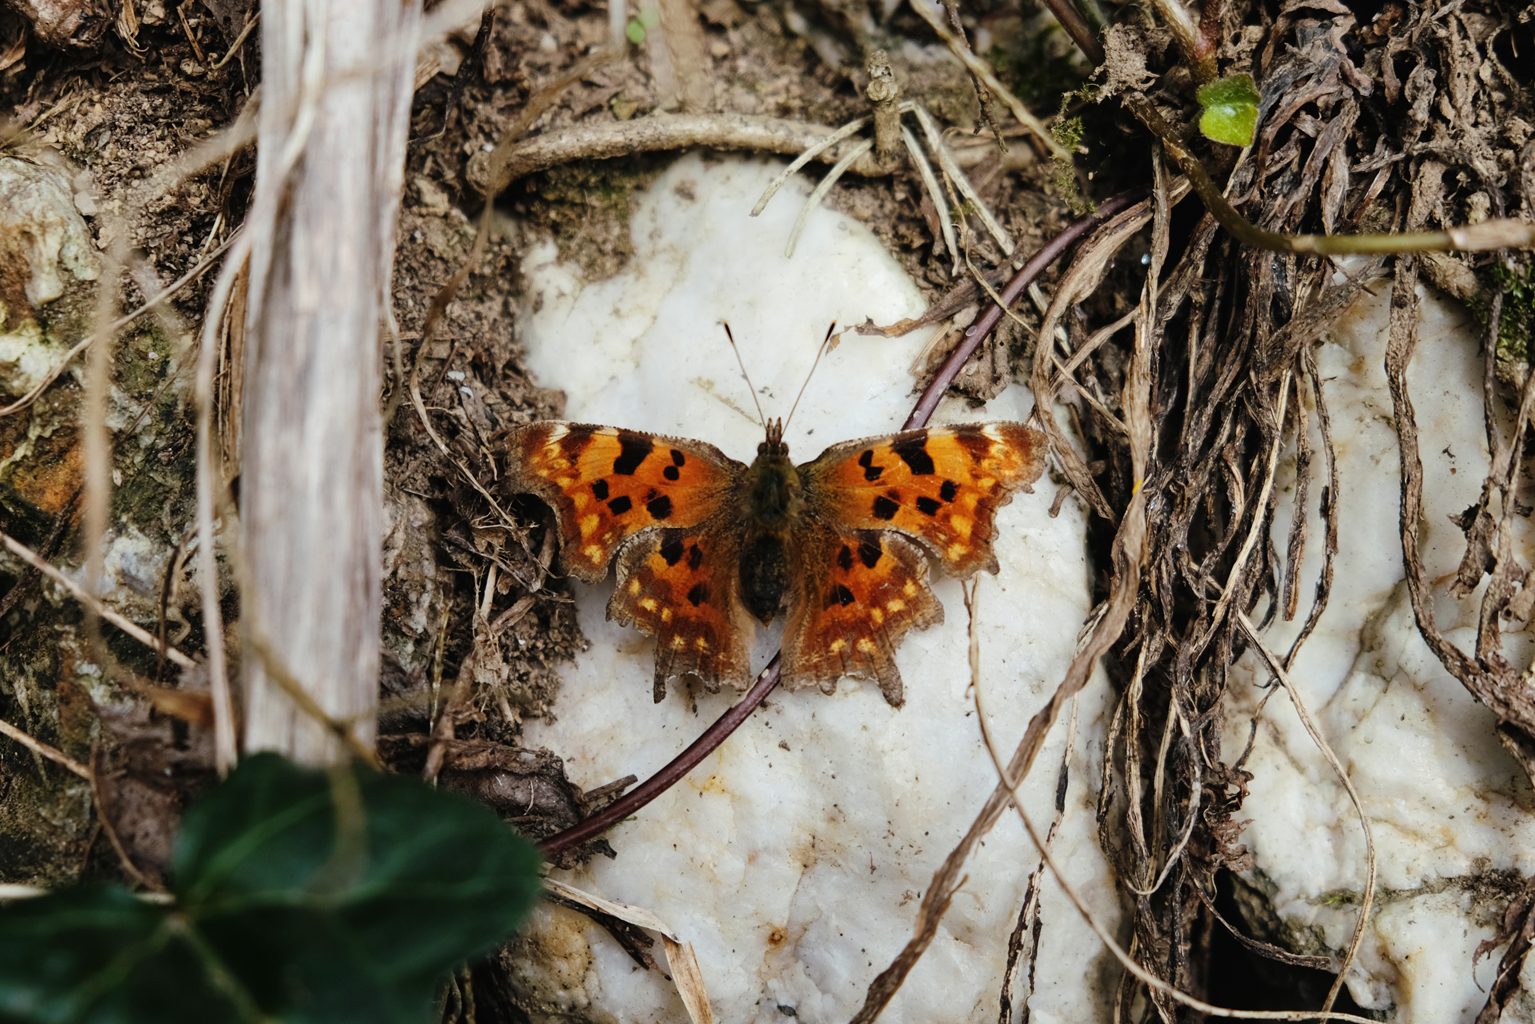   A comma butterfly spotted at our 'secret' campsite  